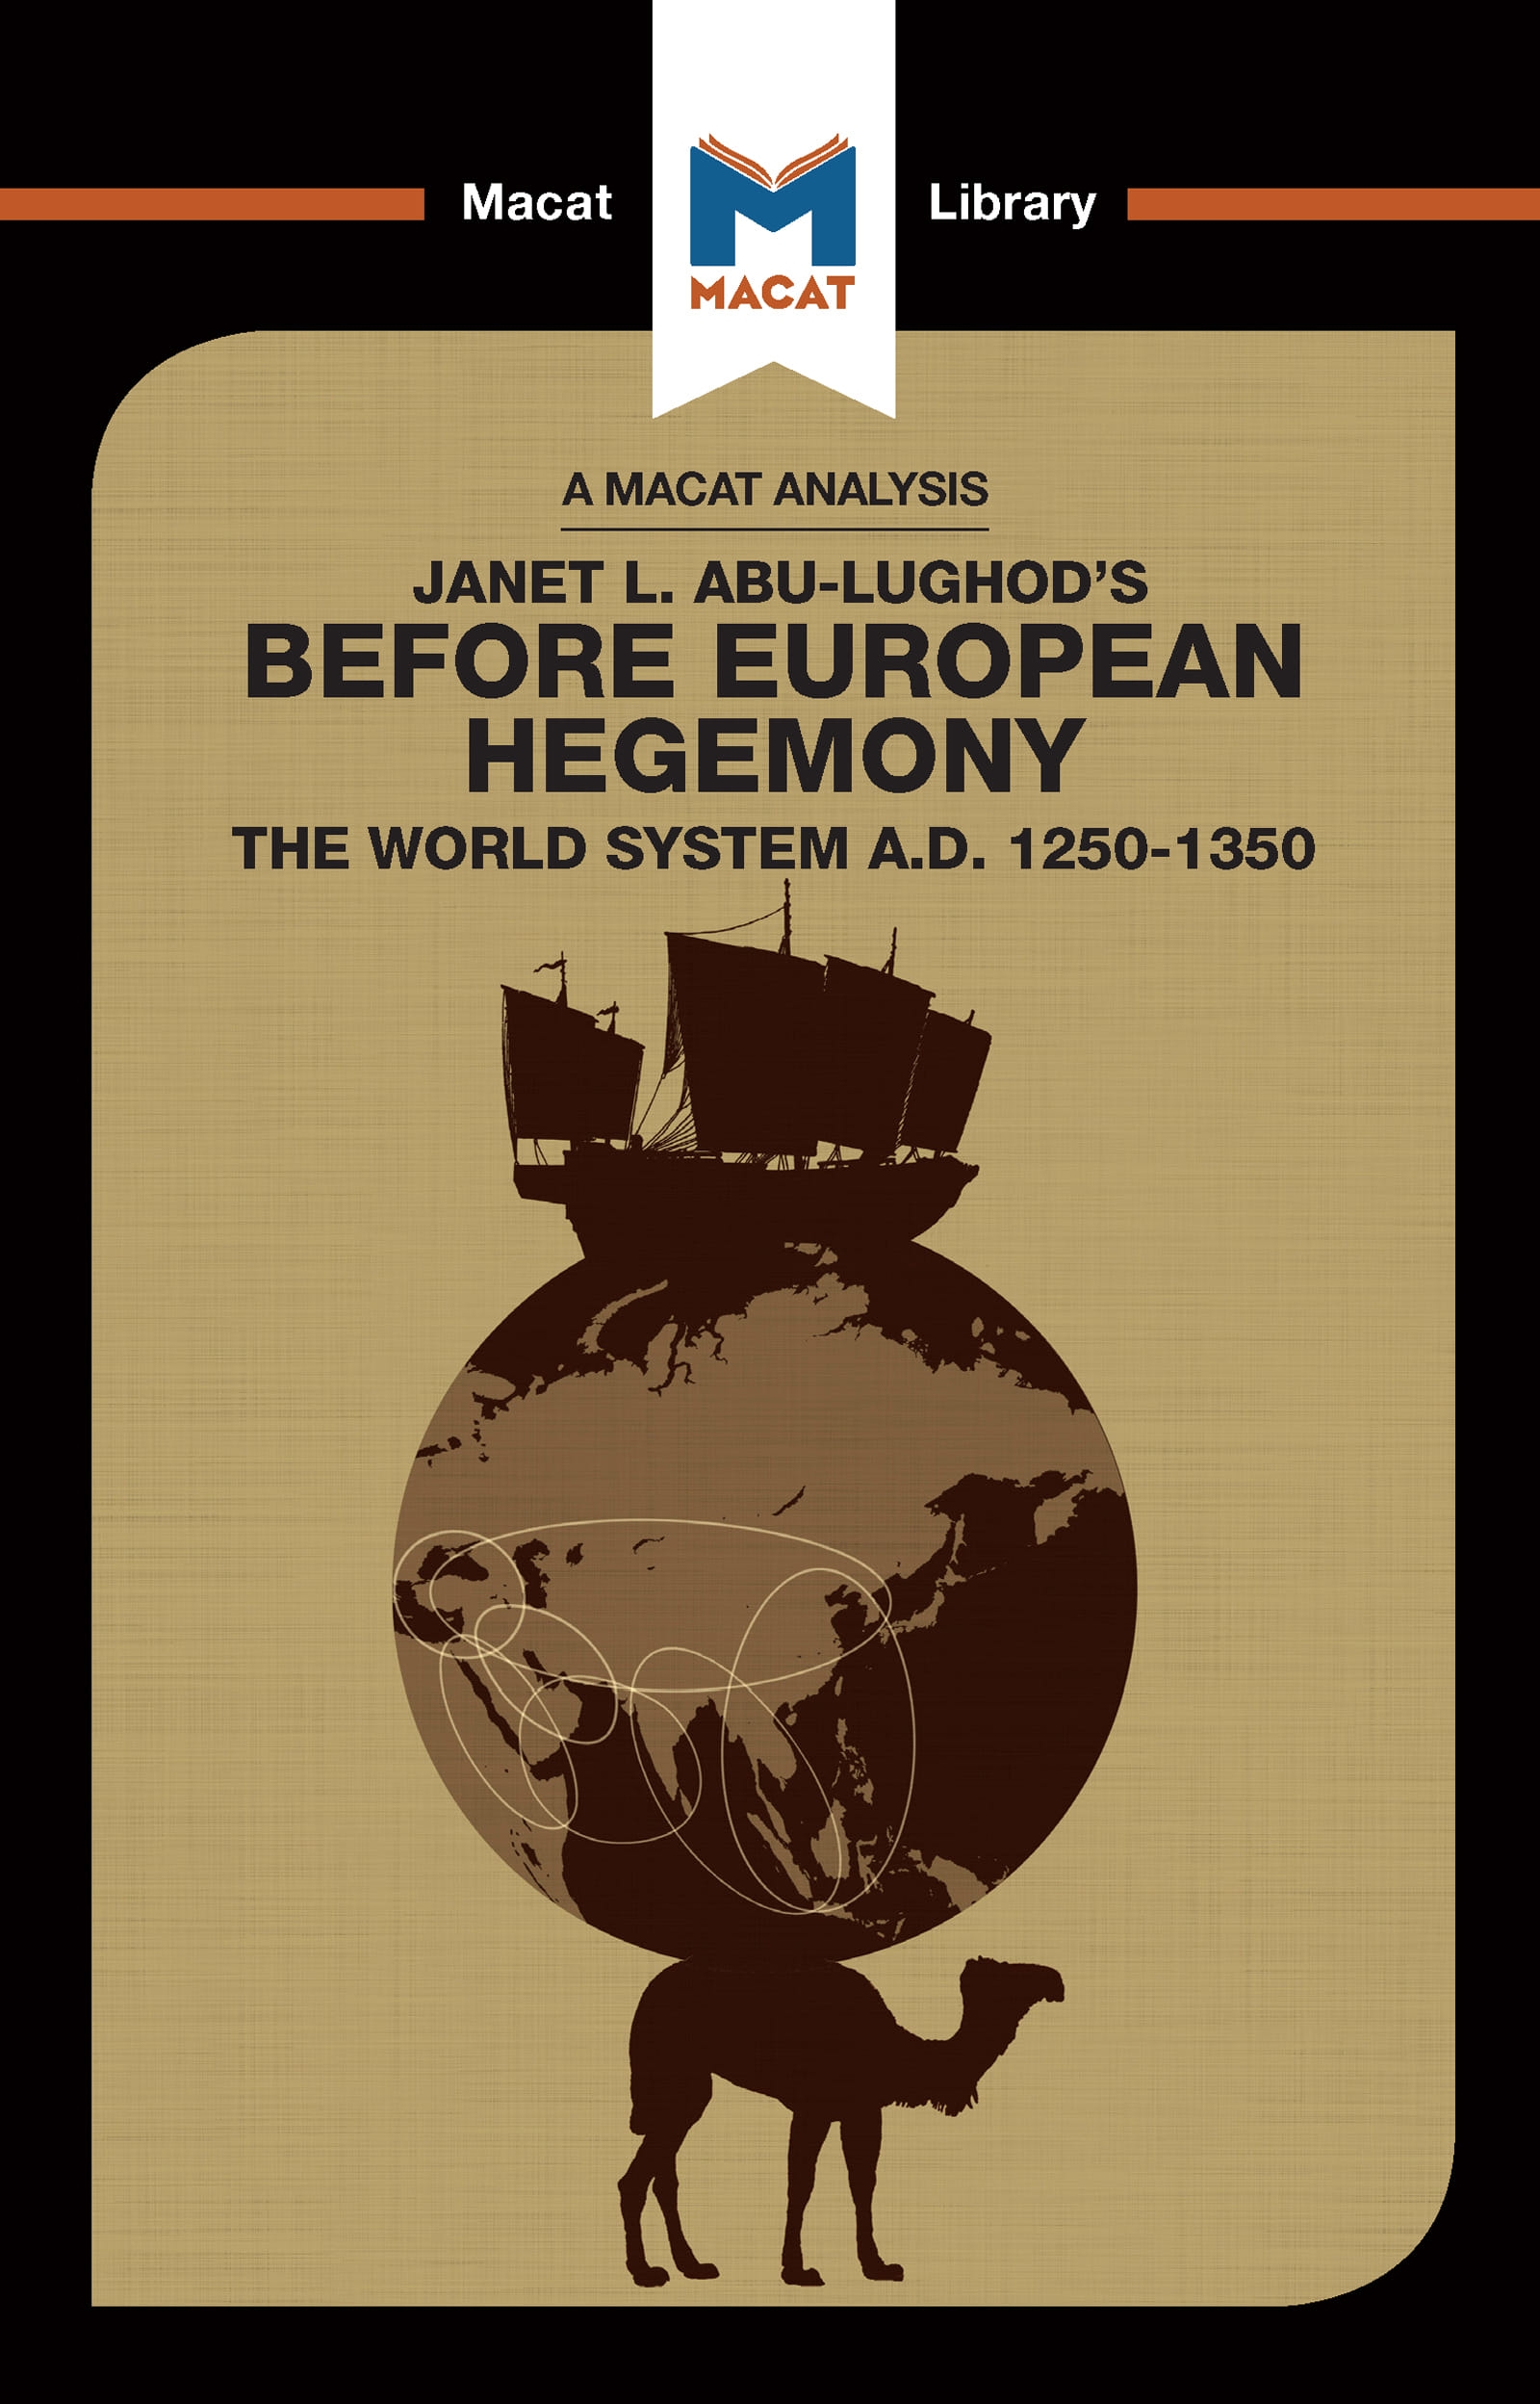 An Analysis of Janet L. Abu-Lughod’’s Before European Hegemony: The World System A.D. 1250-1350